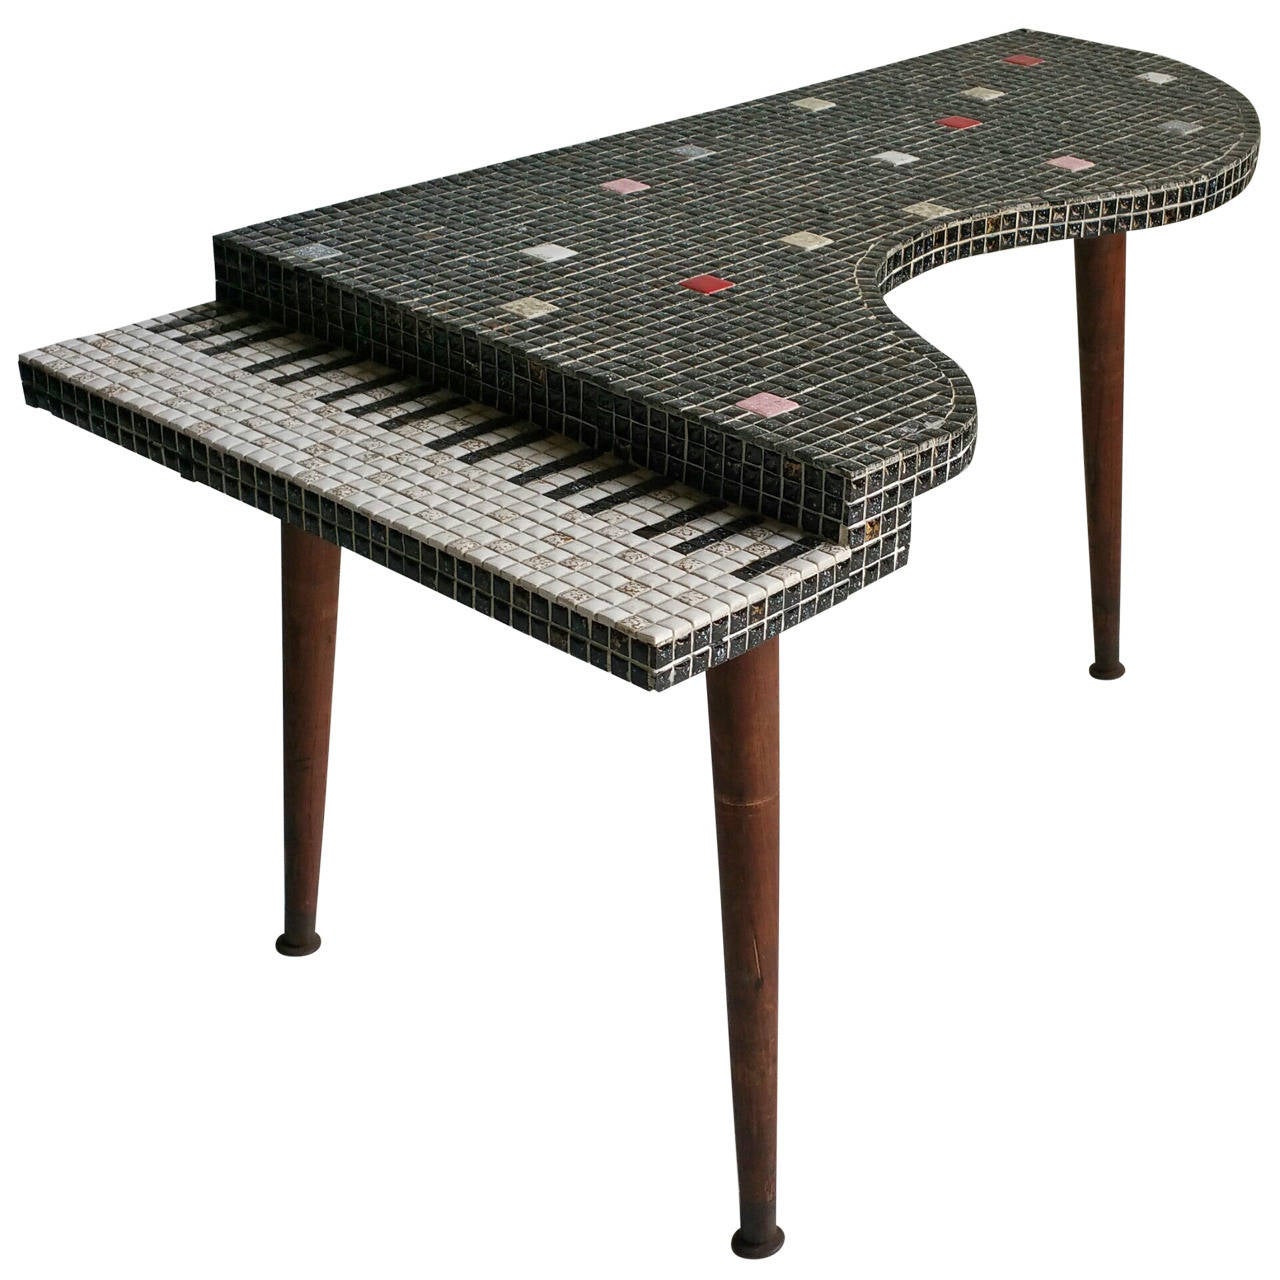 Mid-Century Modern Baby Grand Piano Shaped, Tiled Cocktail Table at 1stDibs